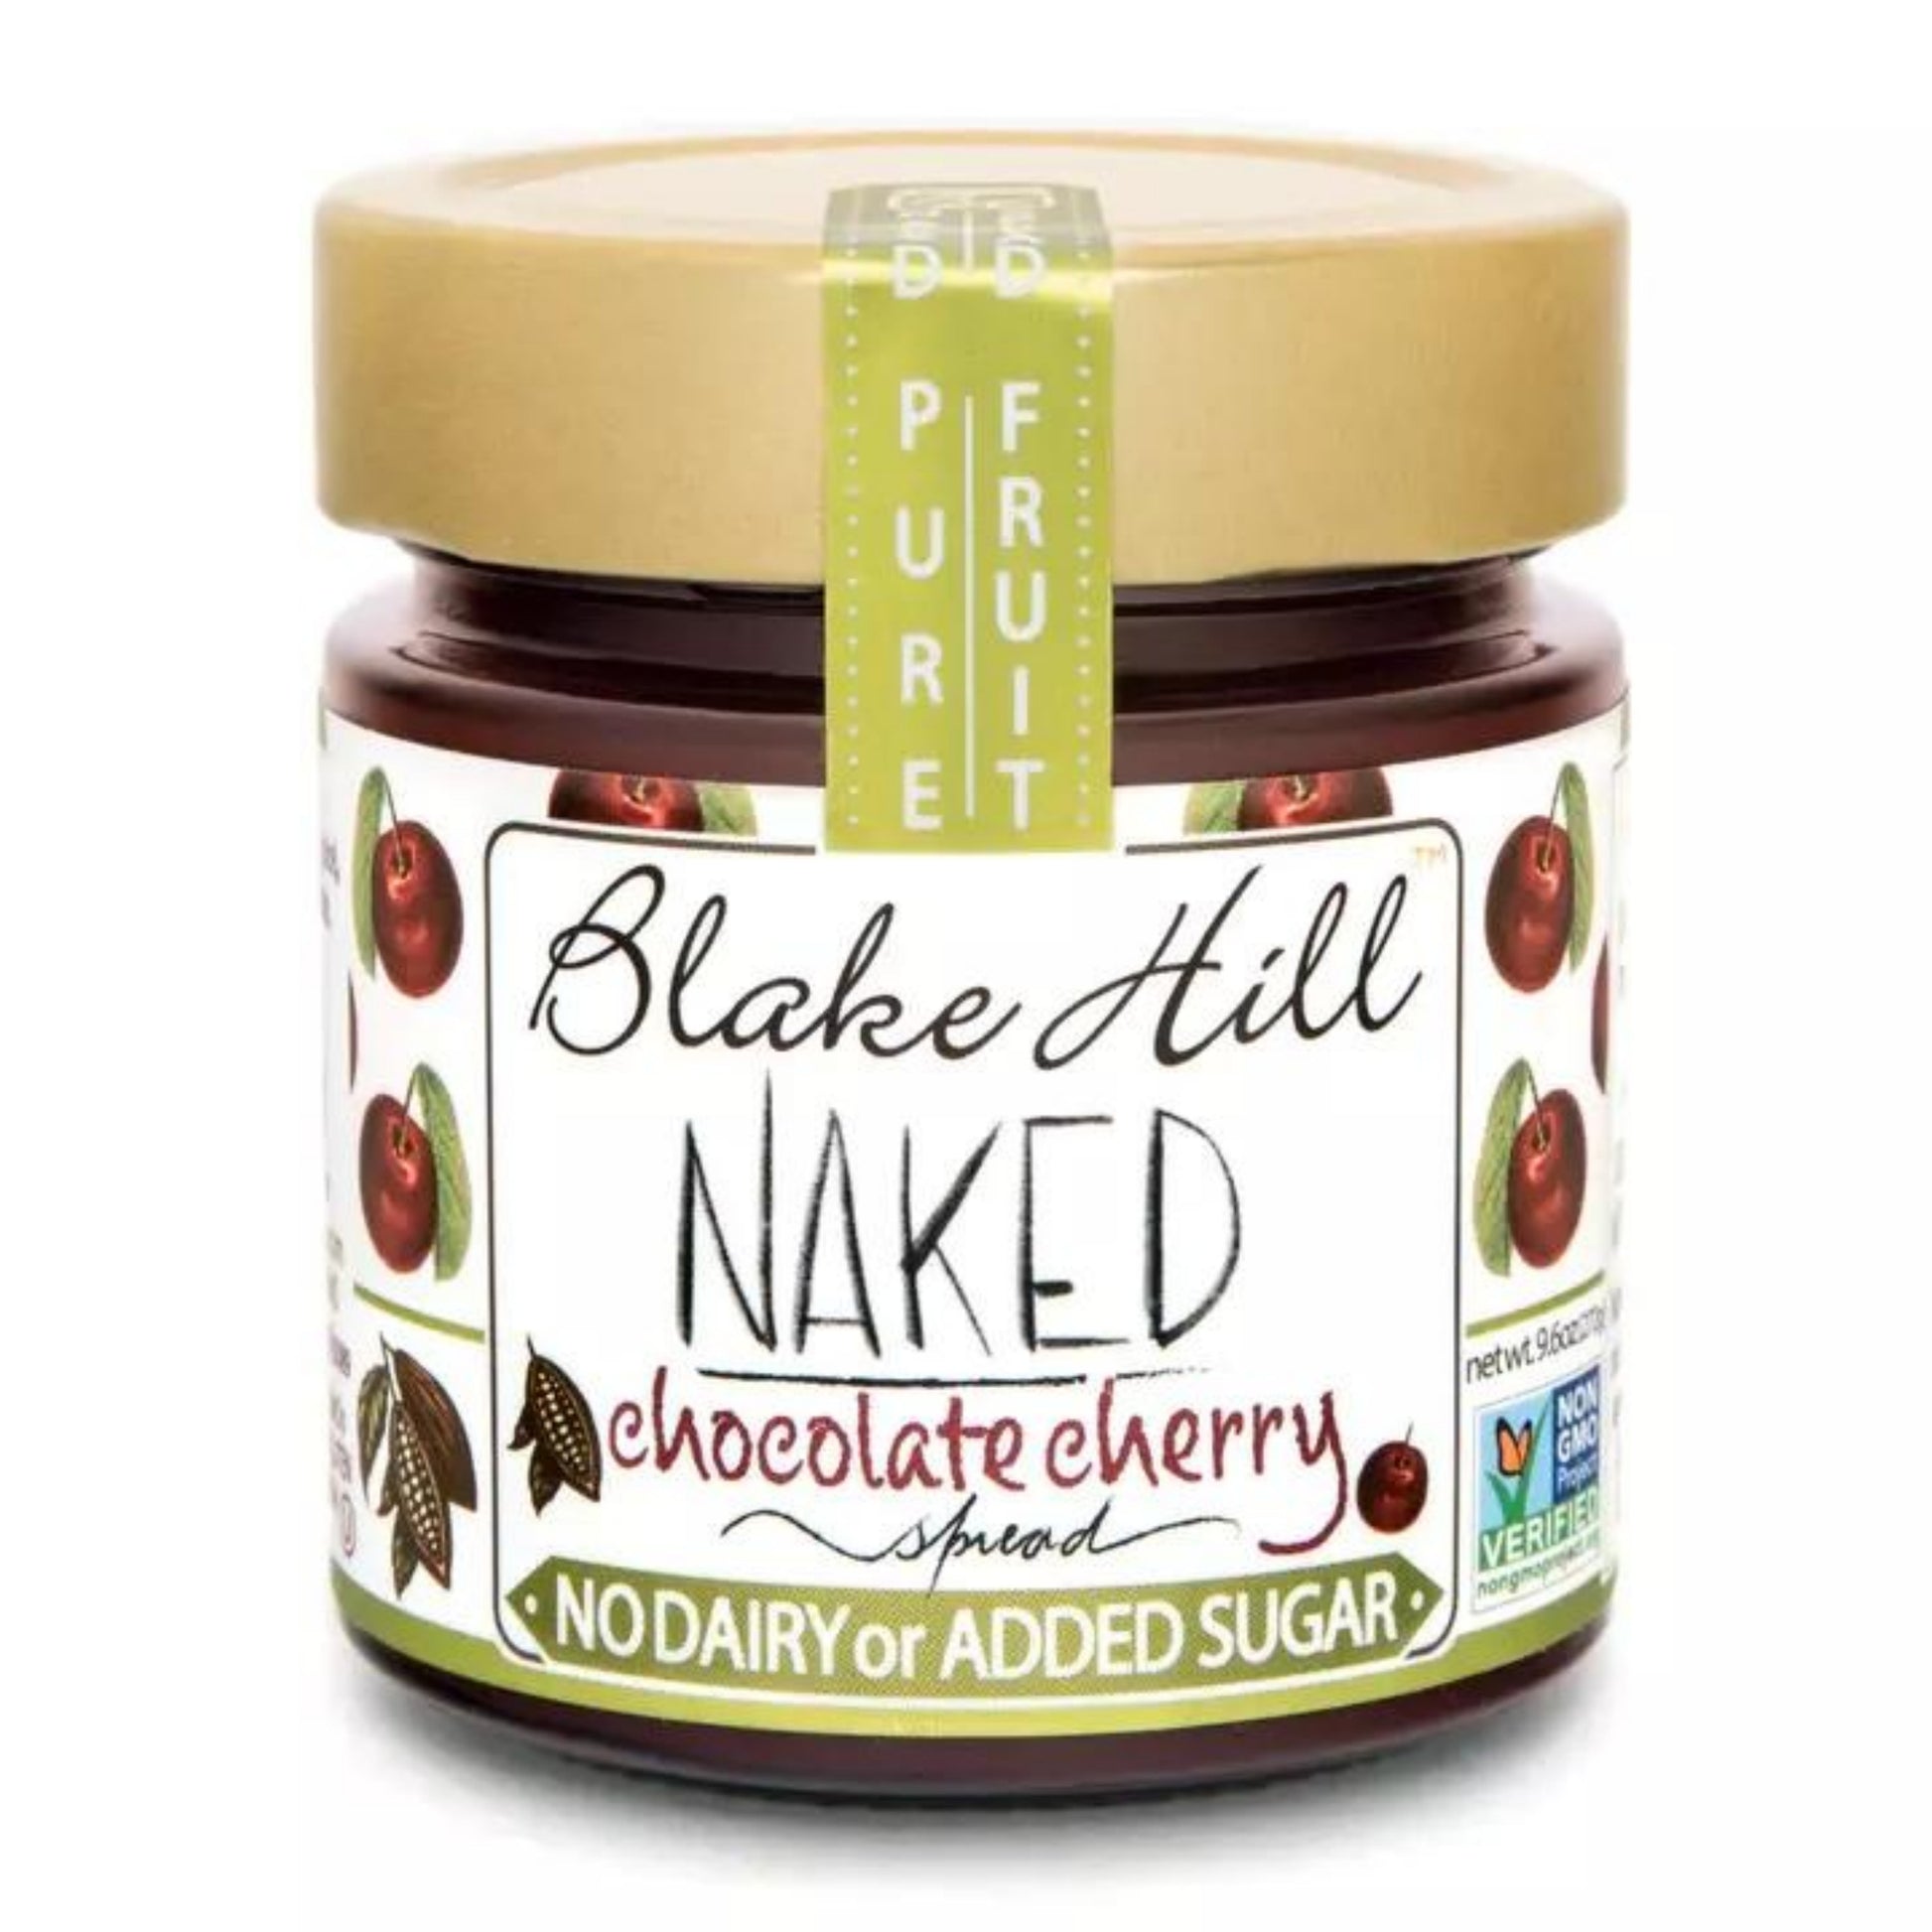 Naked Chocolate Cherry Spread (No Dairy or Added Sugar)